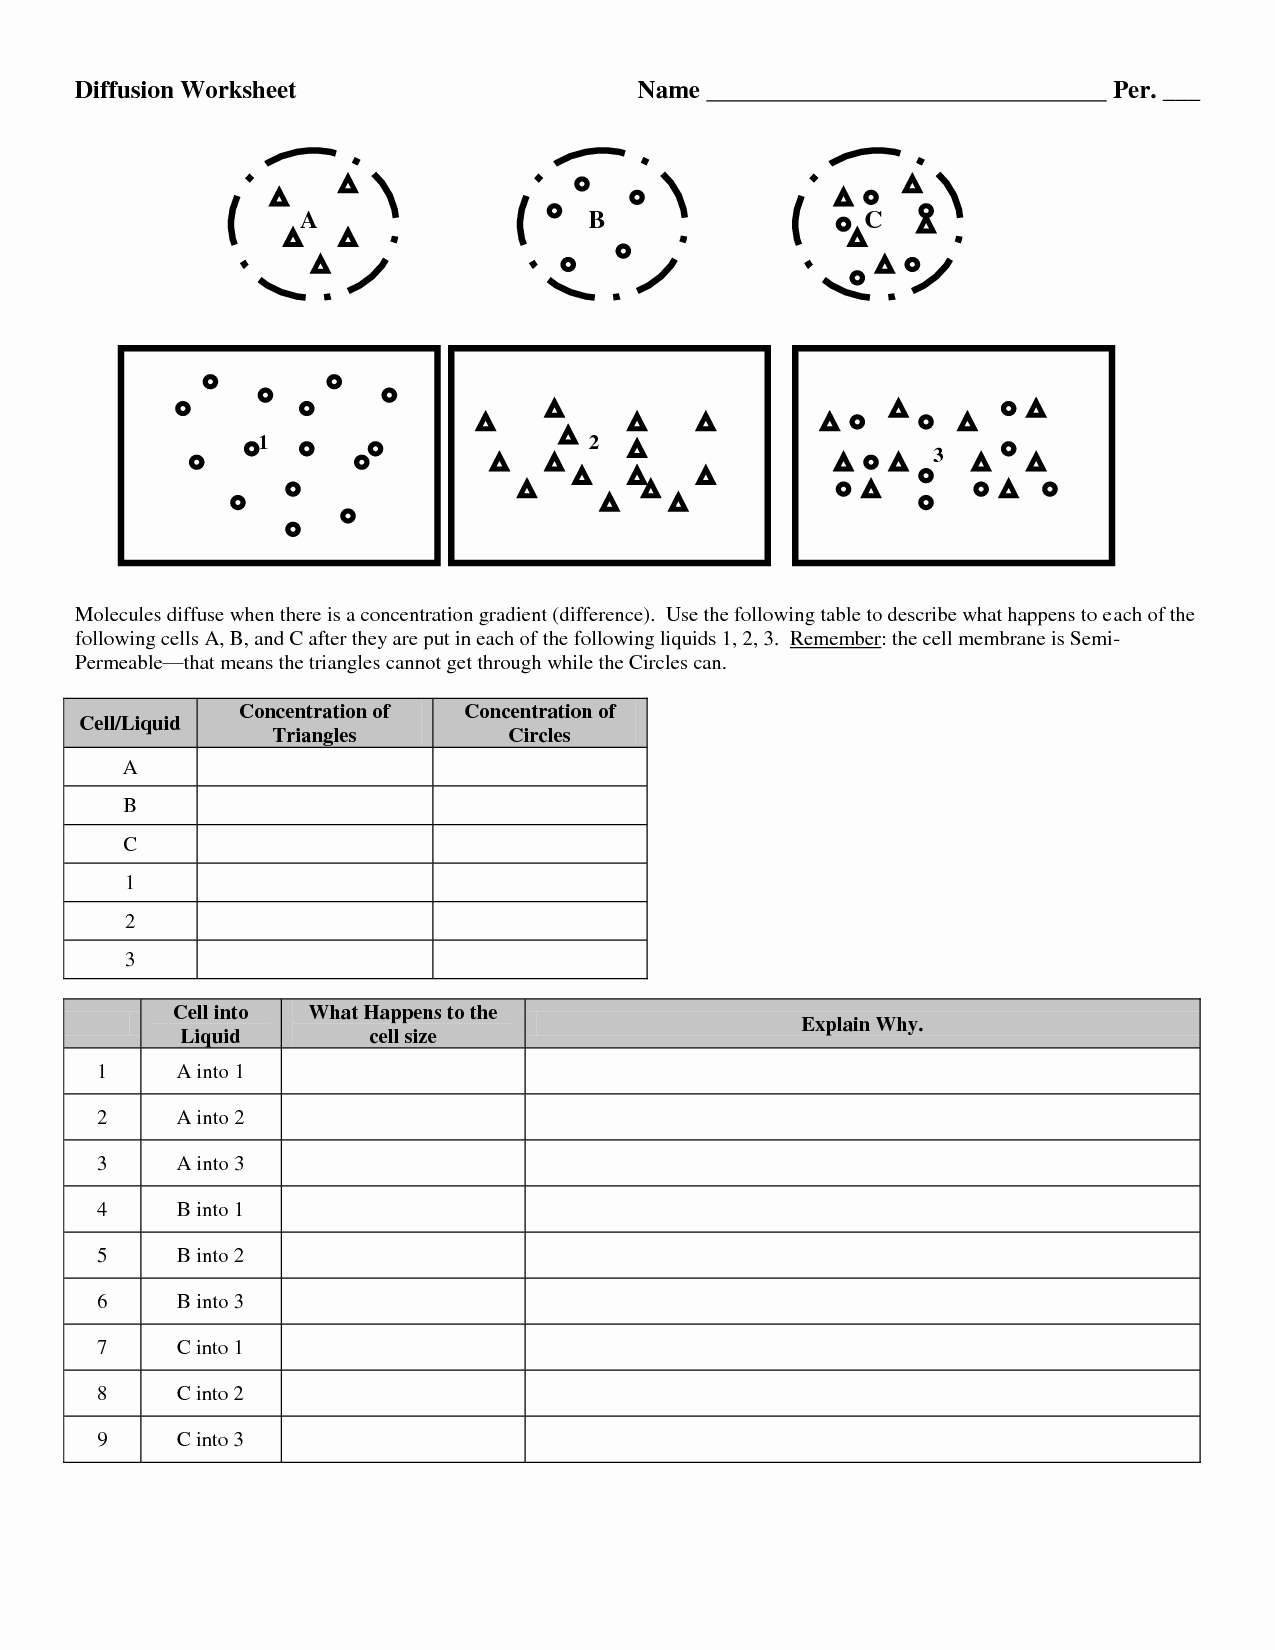 Diffusion and Osmosis Worksheet Answers Awesome 16 Best Of Diffusion Osmosis Active Transport